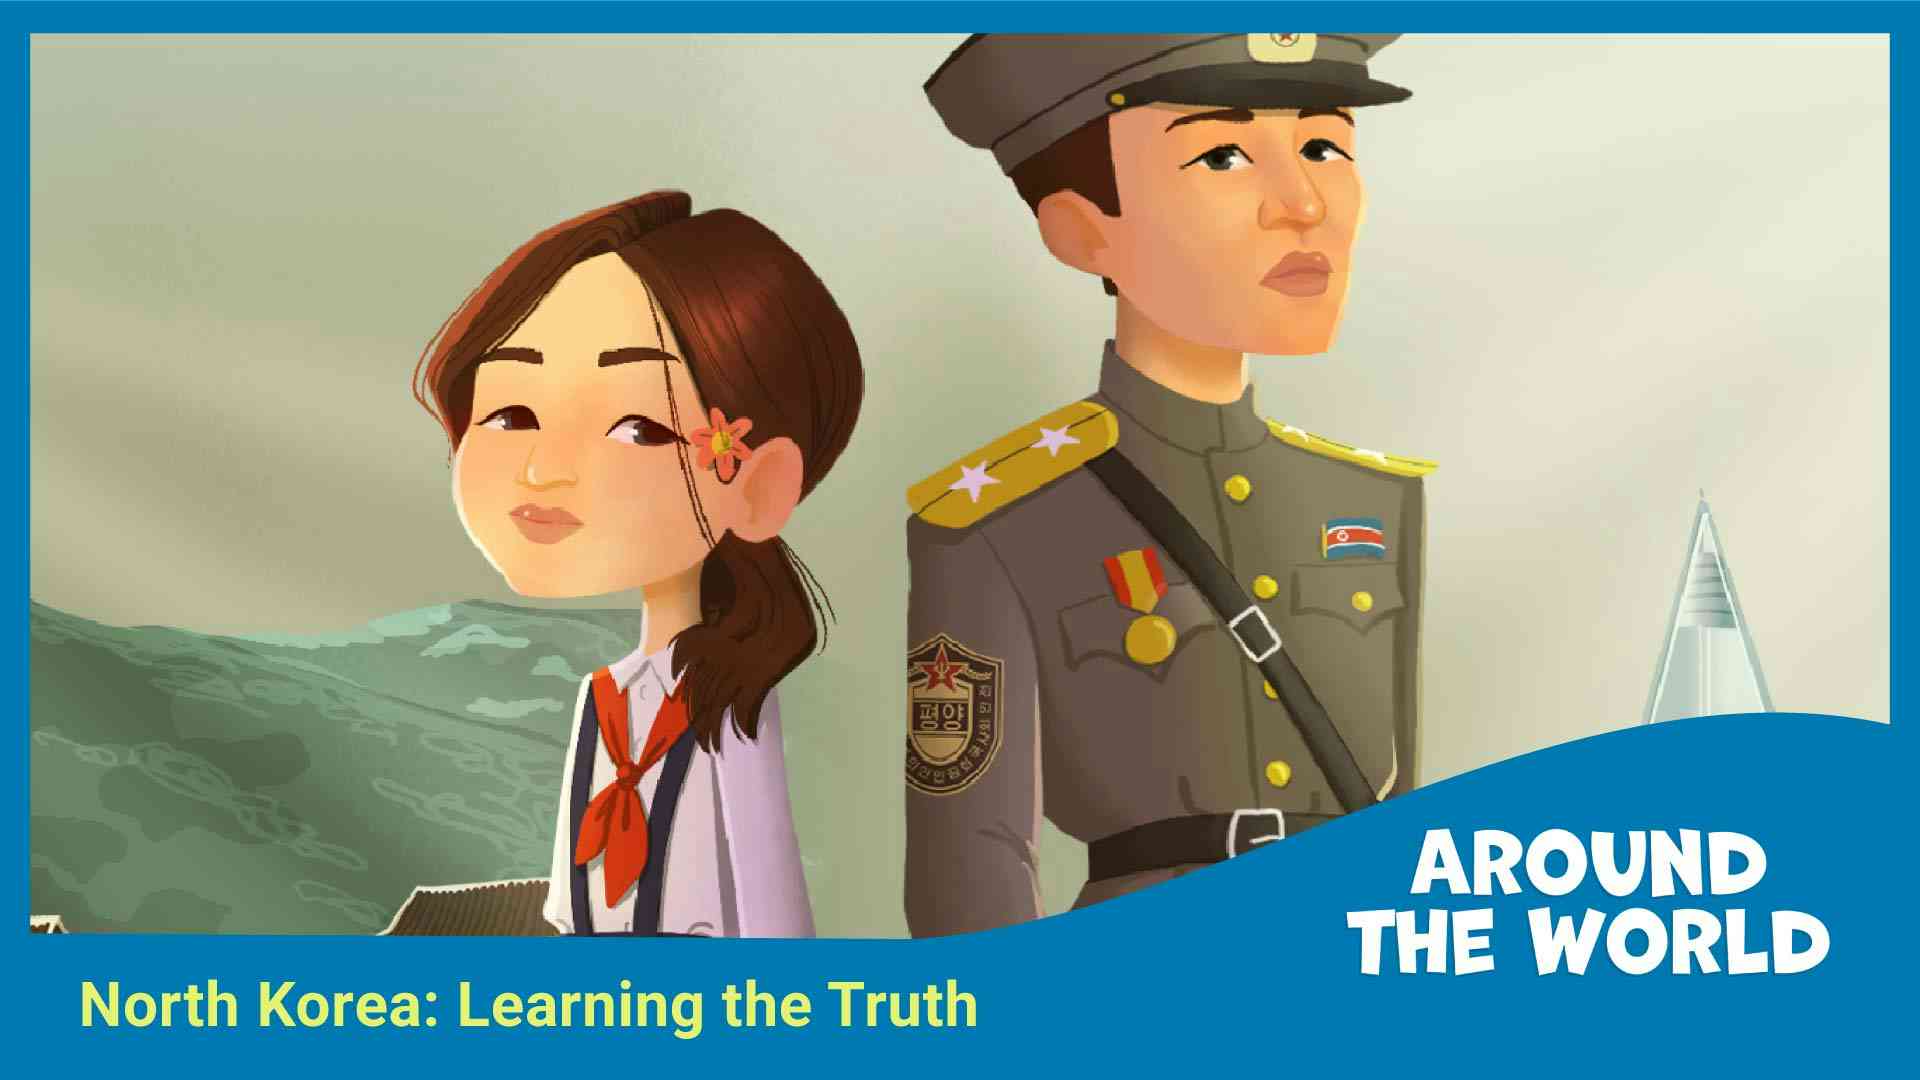 North Korea: Learning the Truth